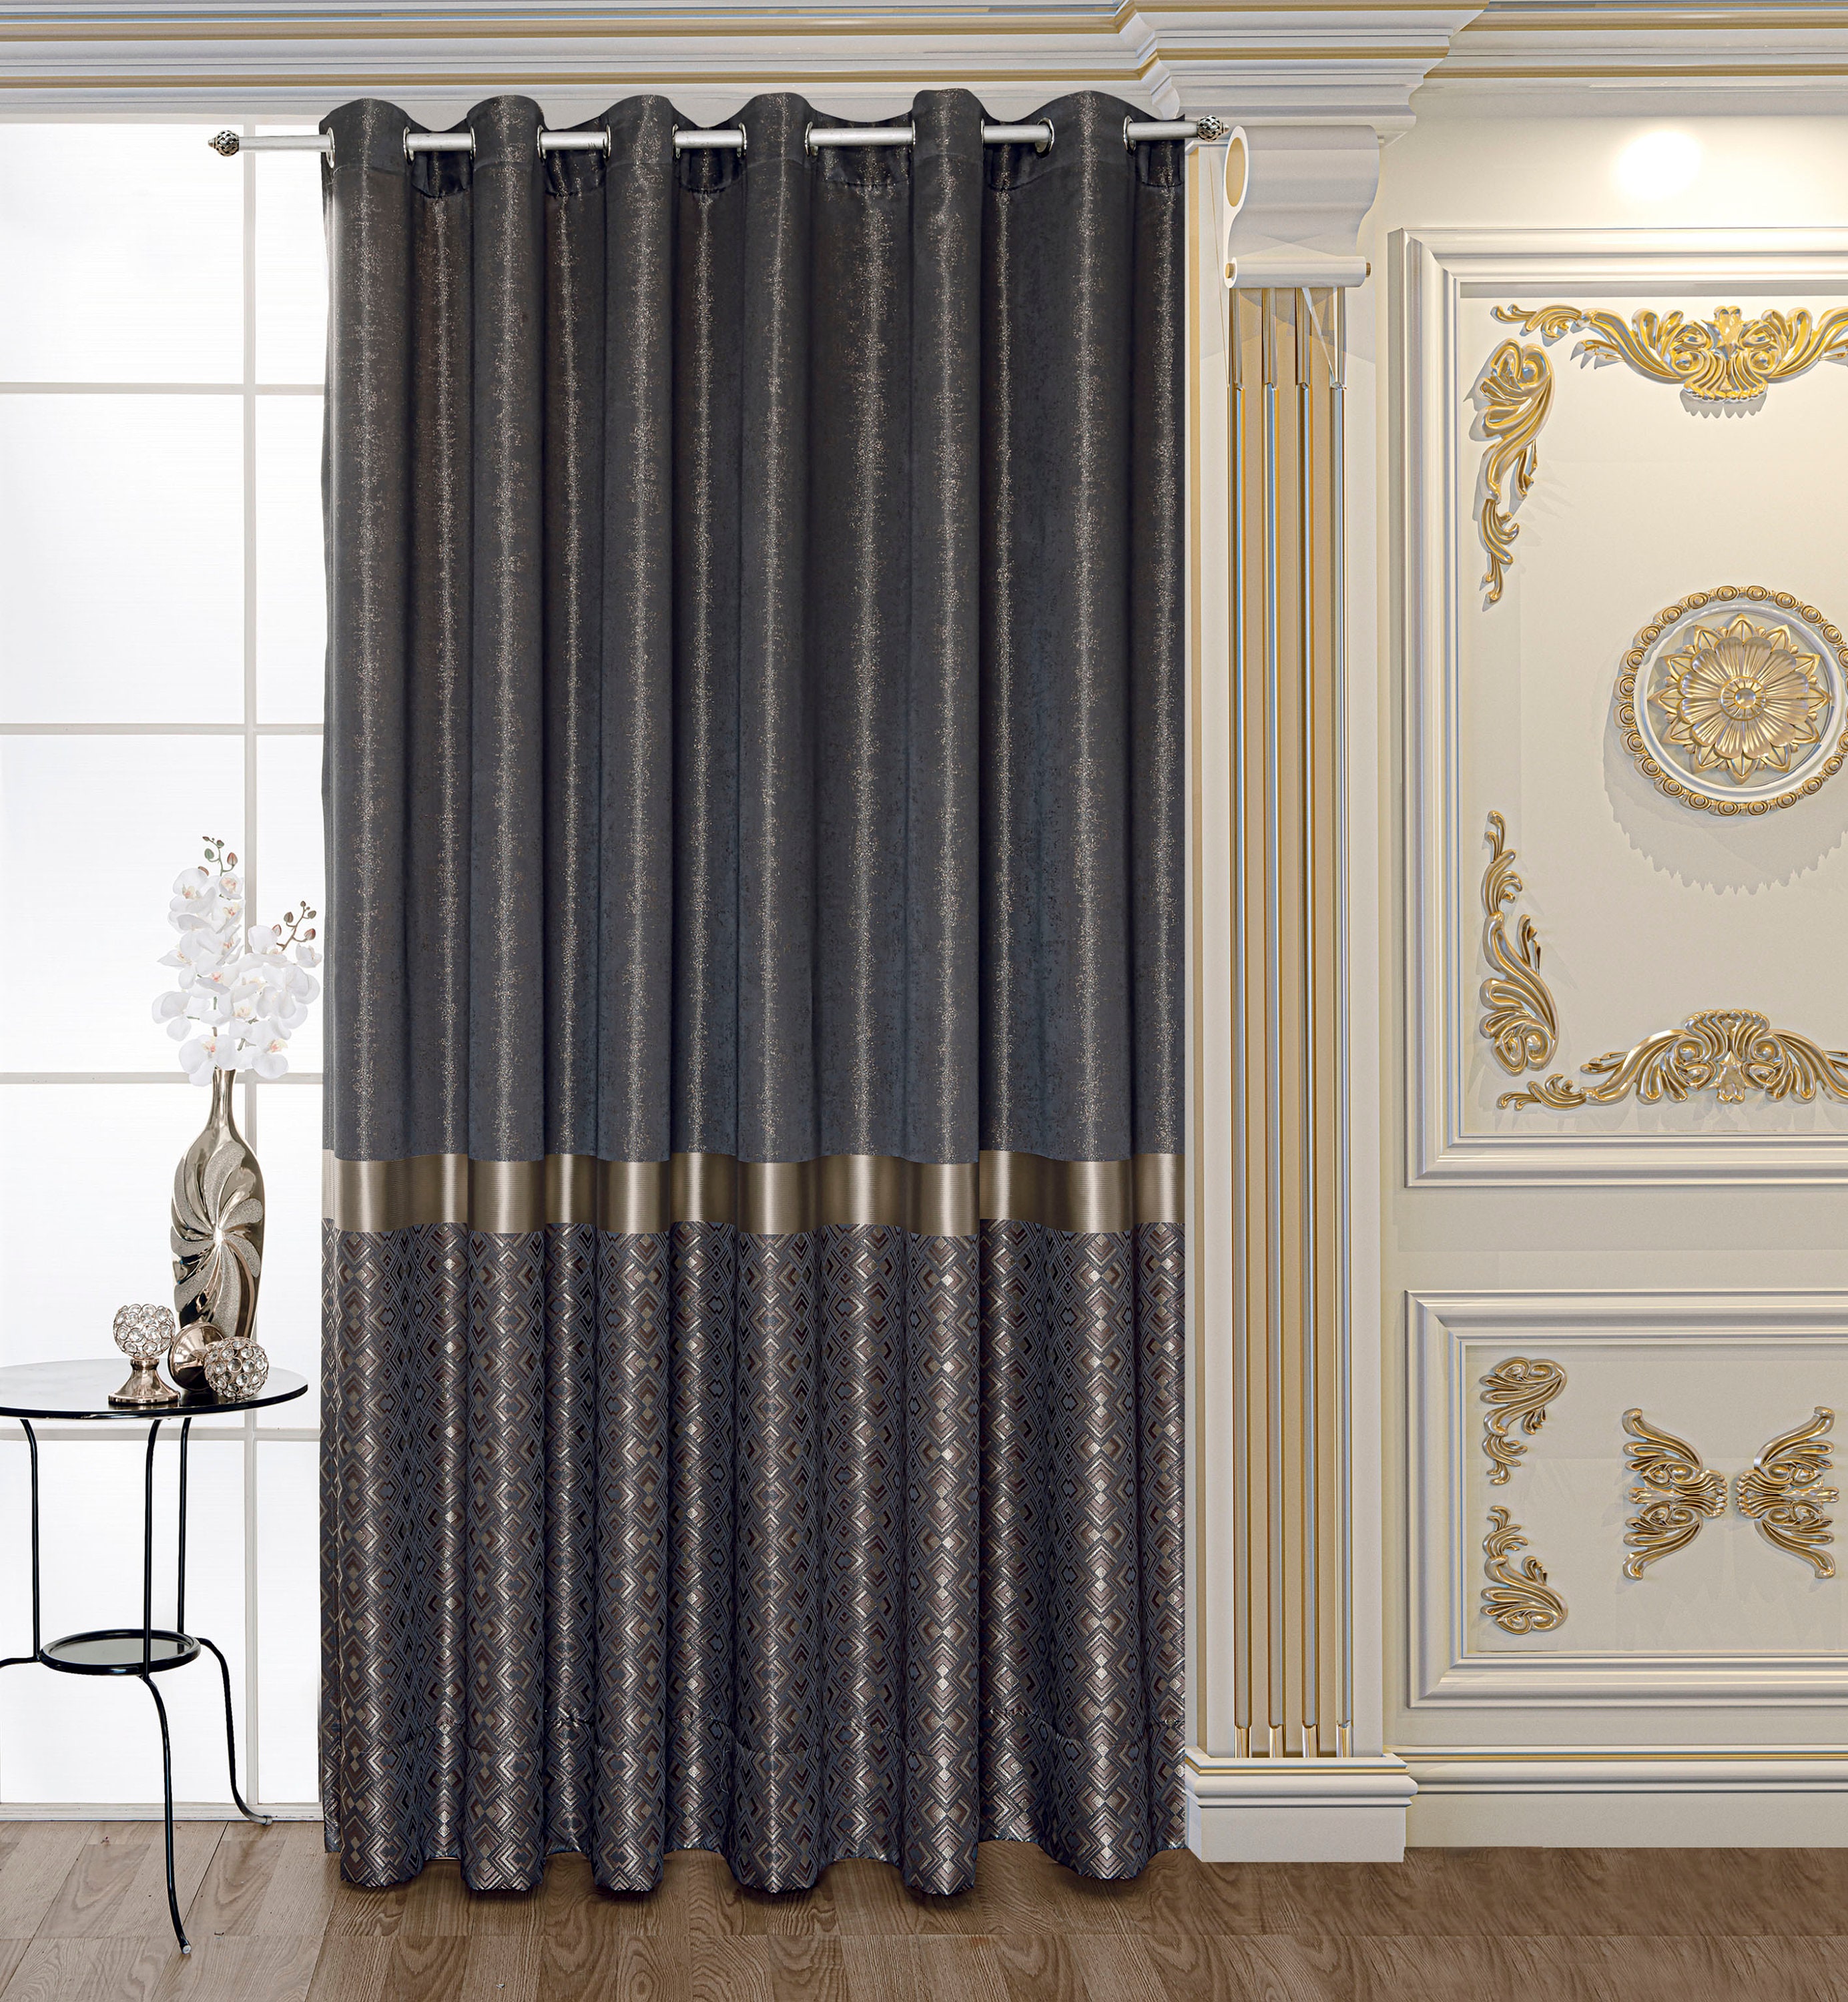 Luxury Jacquard Curtains With Seven 7 Color Designs - Etsy